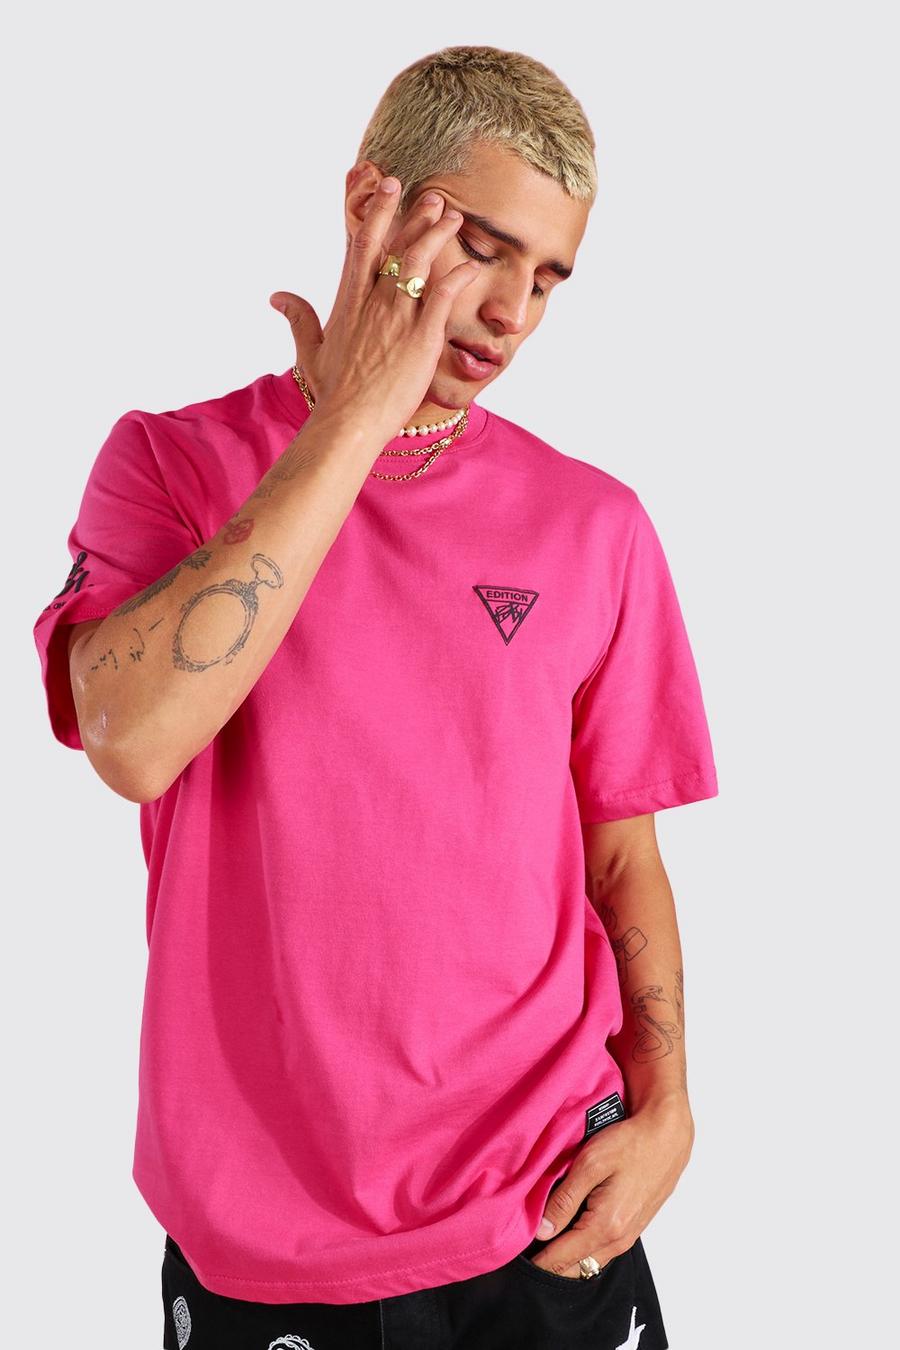 T-shirt Worldwide, Pink image number 1